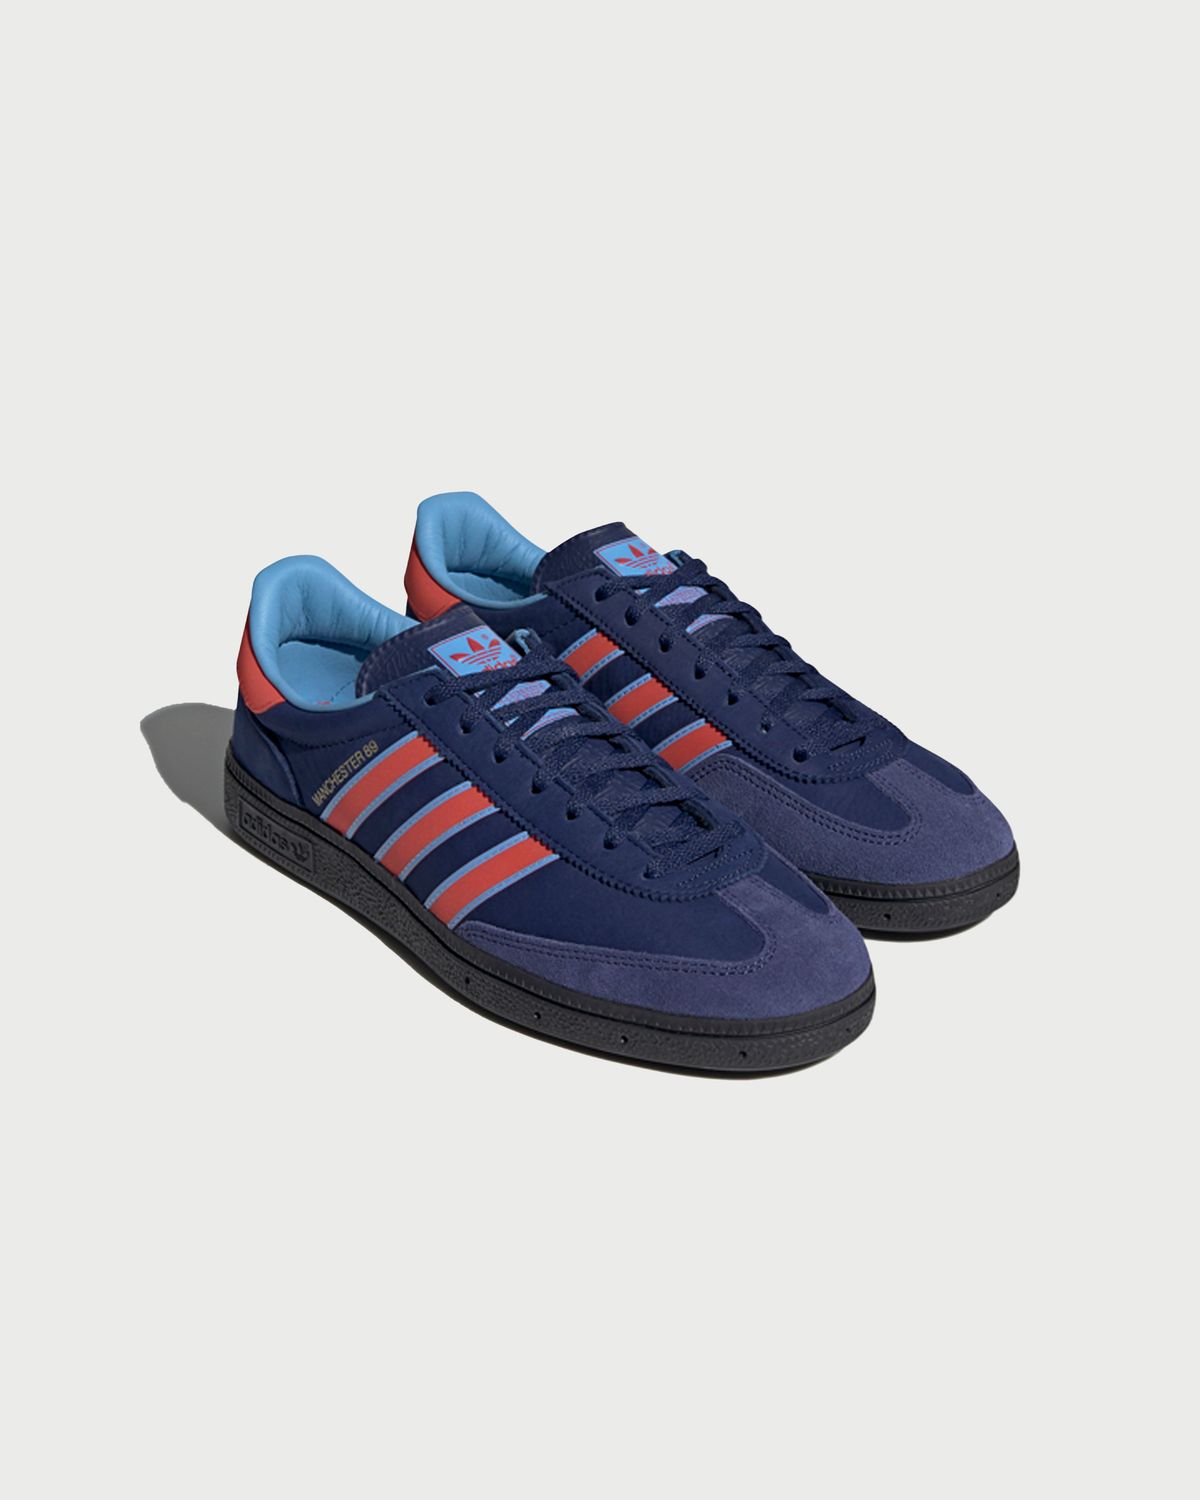 Adidas – Spezial Manchester 89 Trainer Navy - Low Top Sneakers - Blue - Image 2